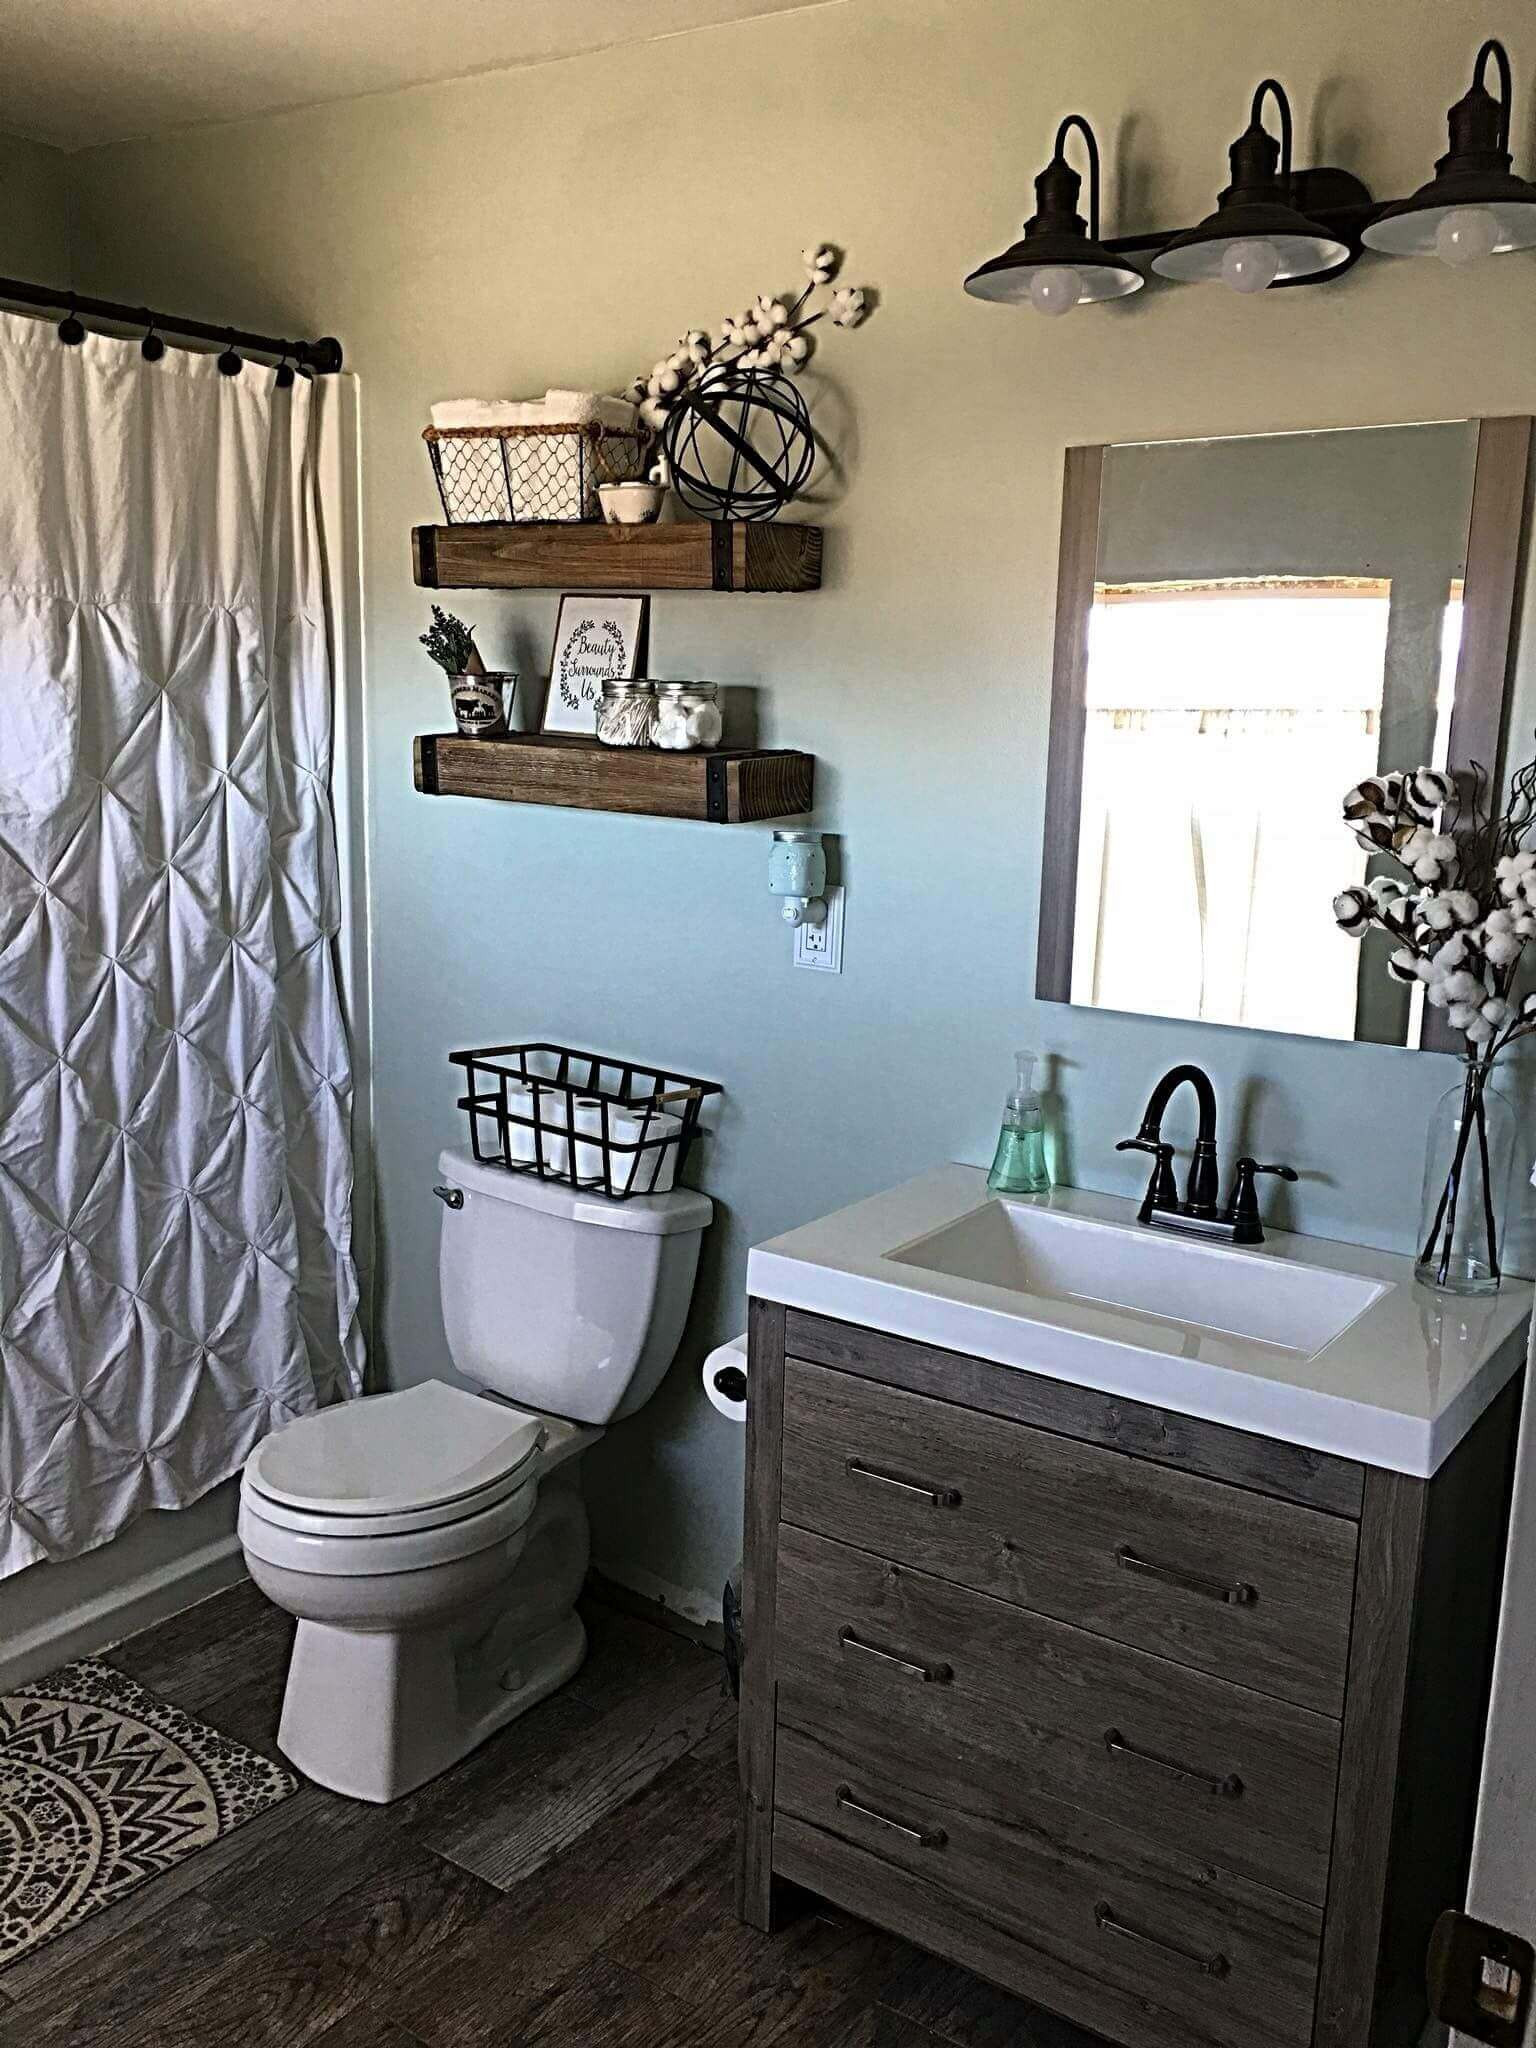 Guest Bathroom Design
 29 Small Guest Bathroom Ideas to ‘Wow’ Your Visitors